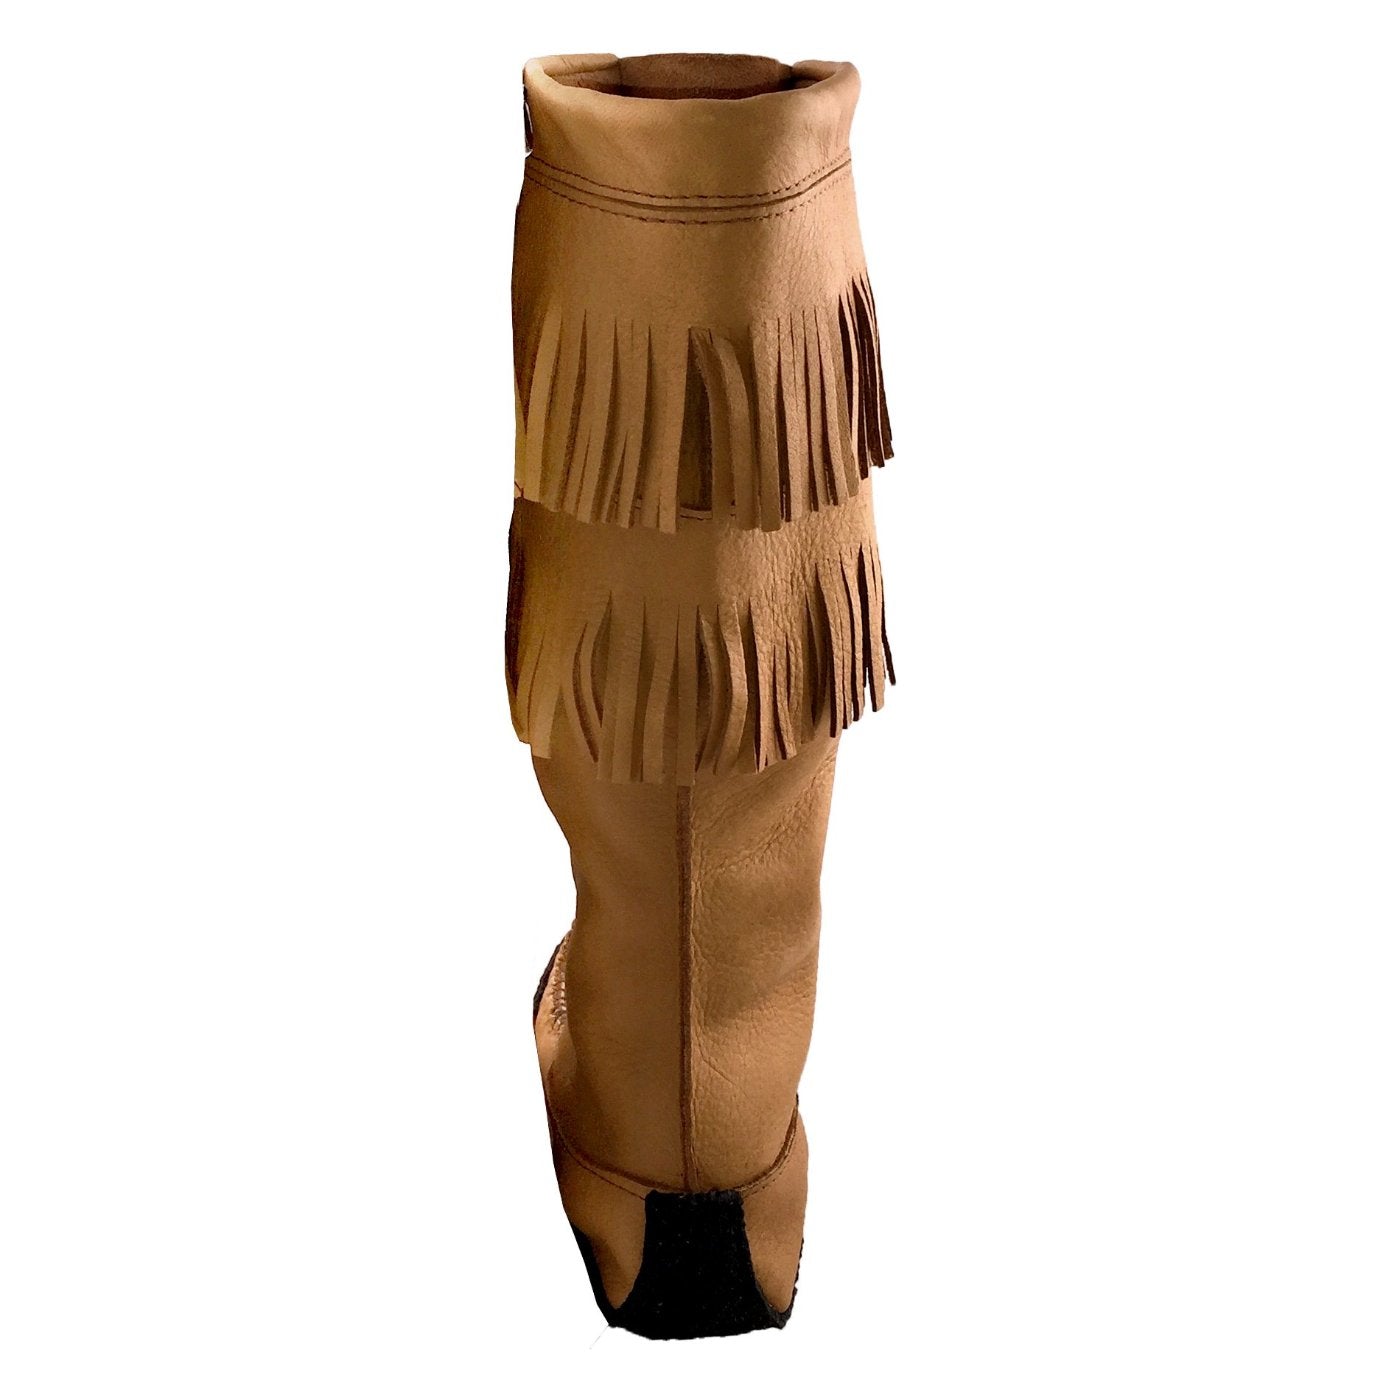 Women's Knee-High Moccasin Boots